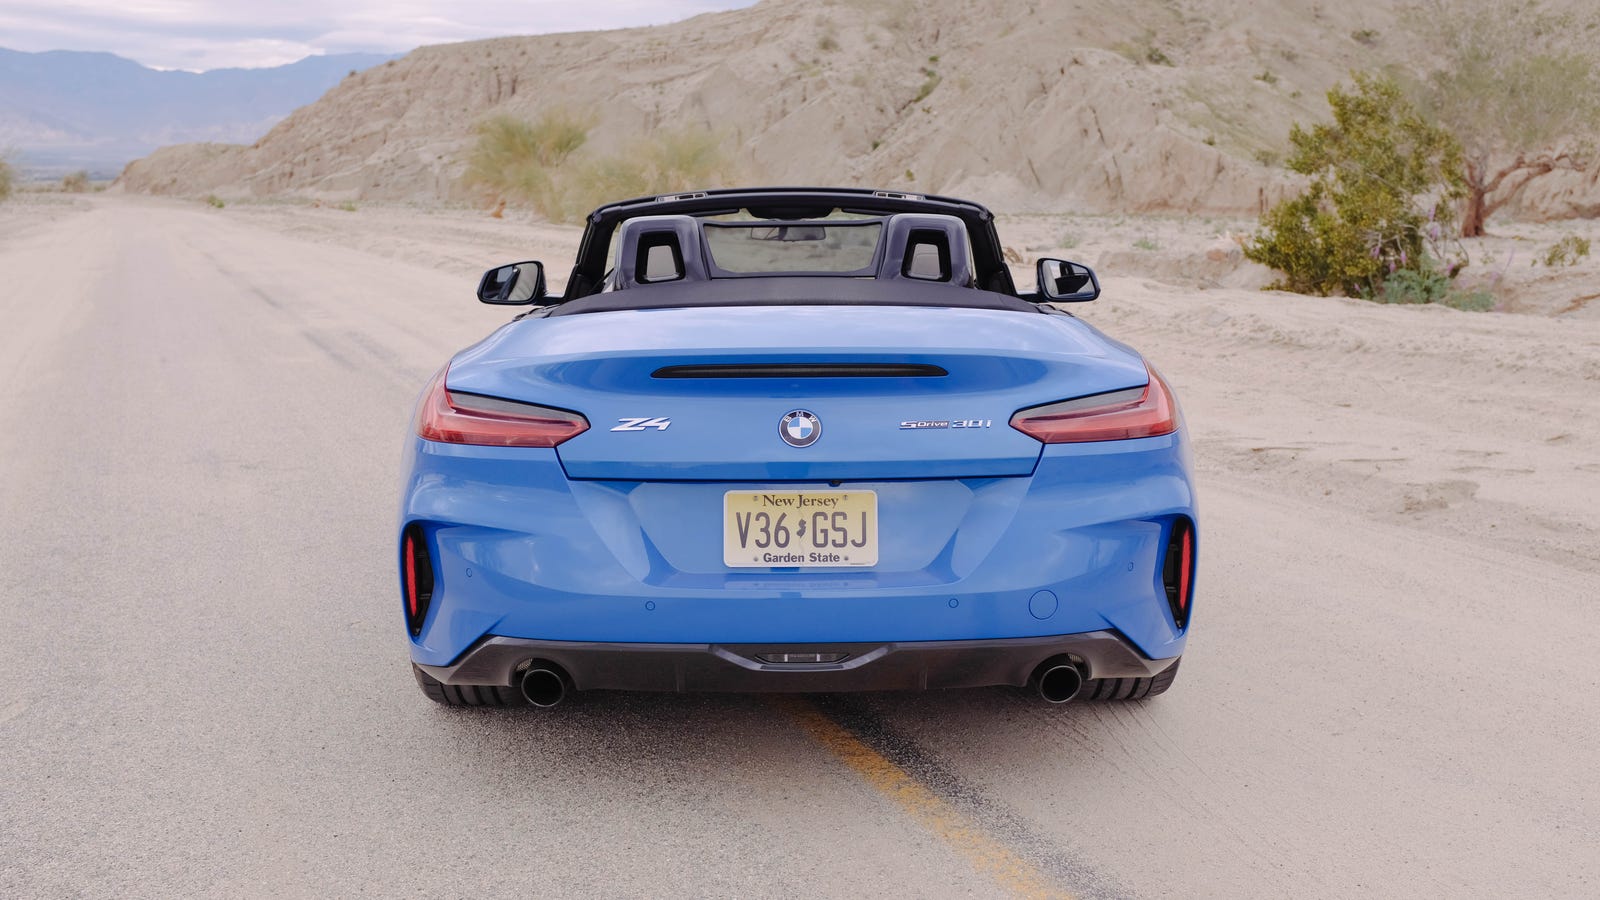 The 2020 Bmw Z4 Is More Than Just A Side Note To The New Toyota Supra 